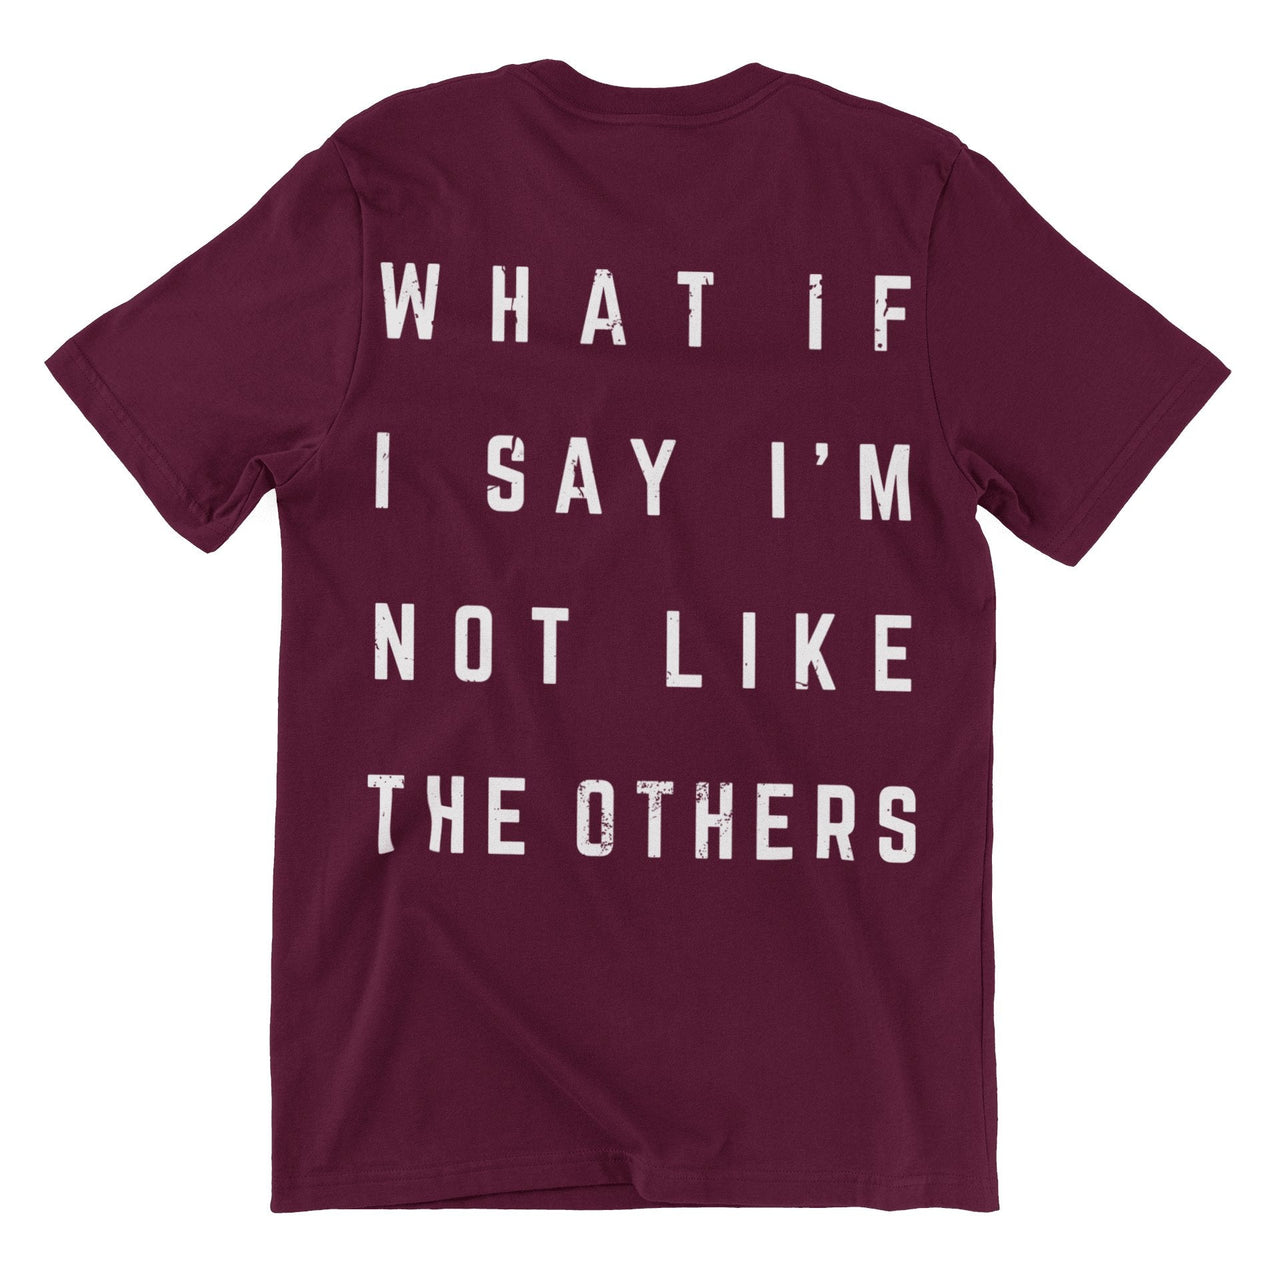 Not Like The Others Graphic T-Shirt For Men 8Ball